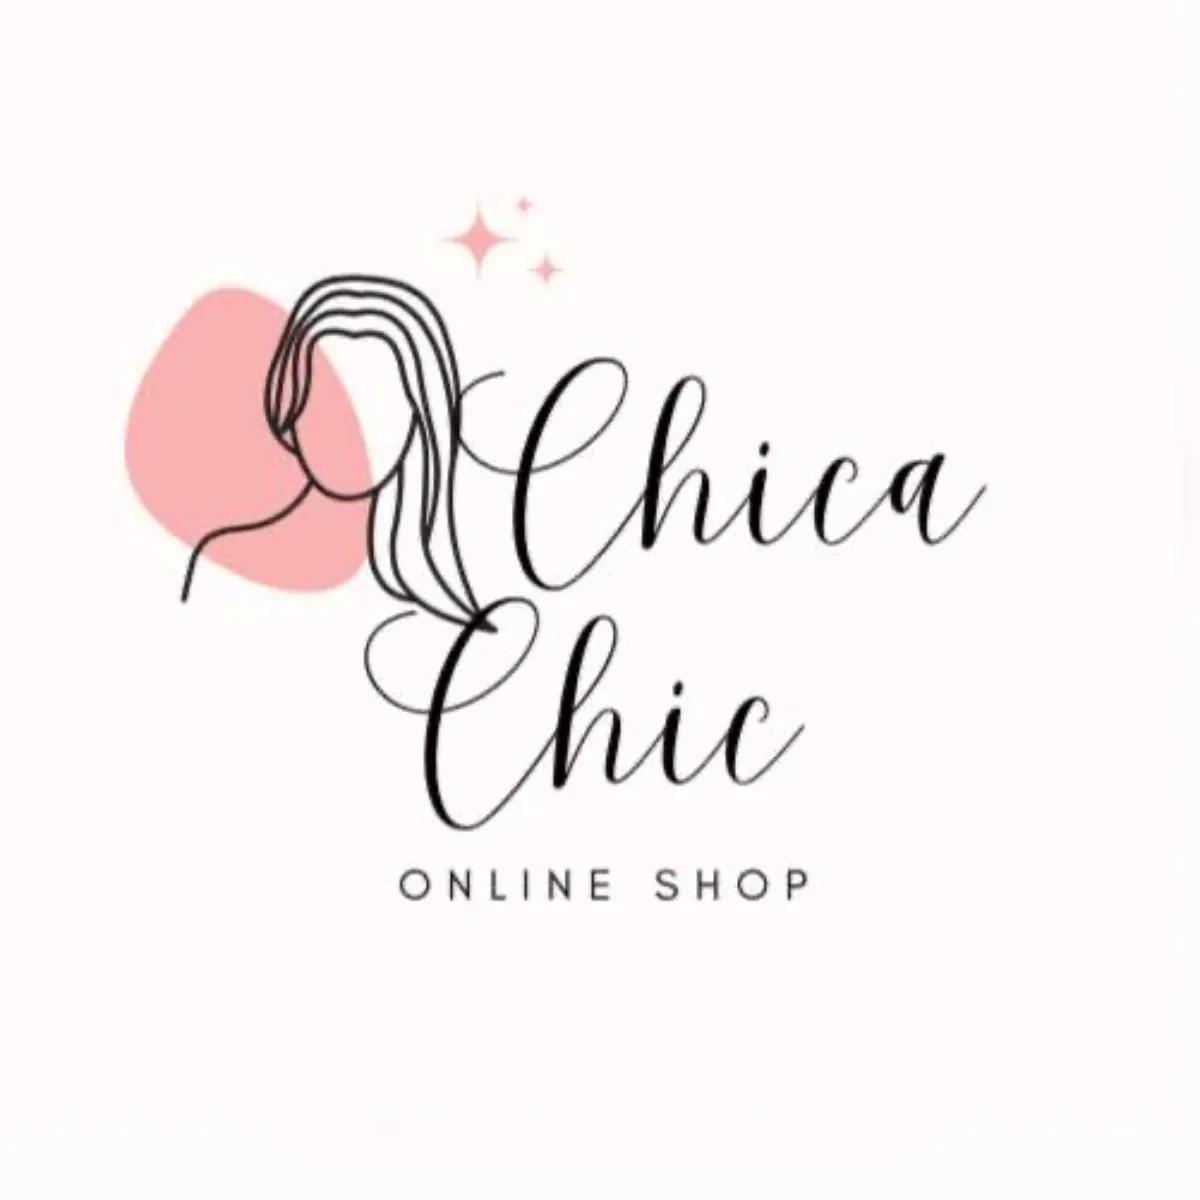 Chica_Chic_Online_Shop